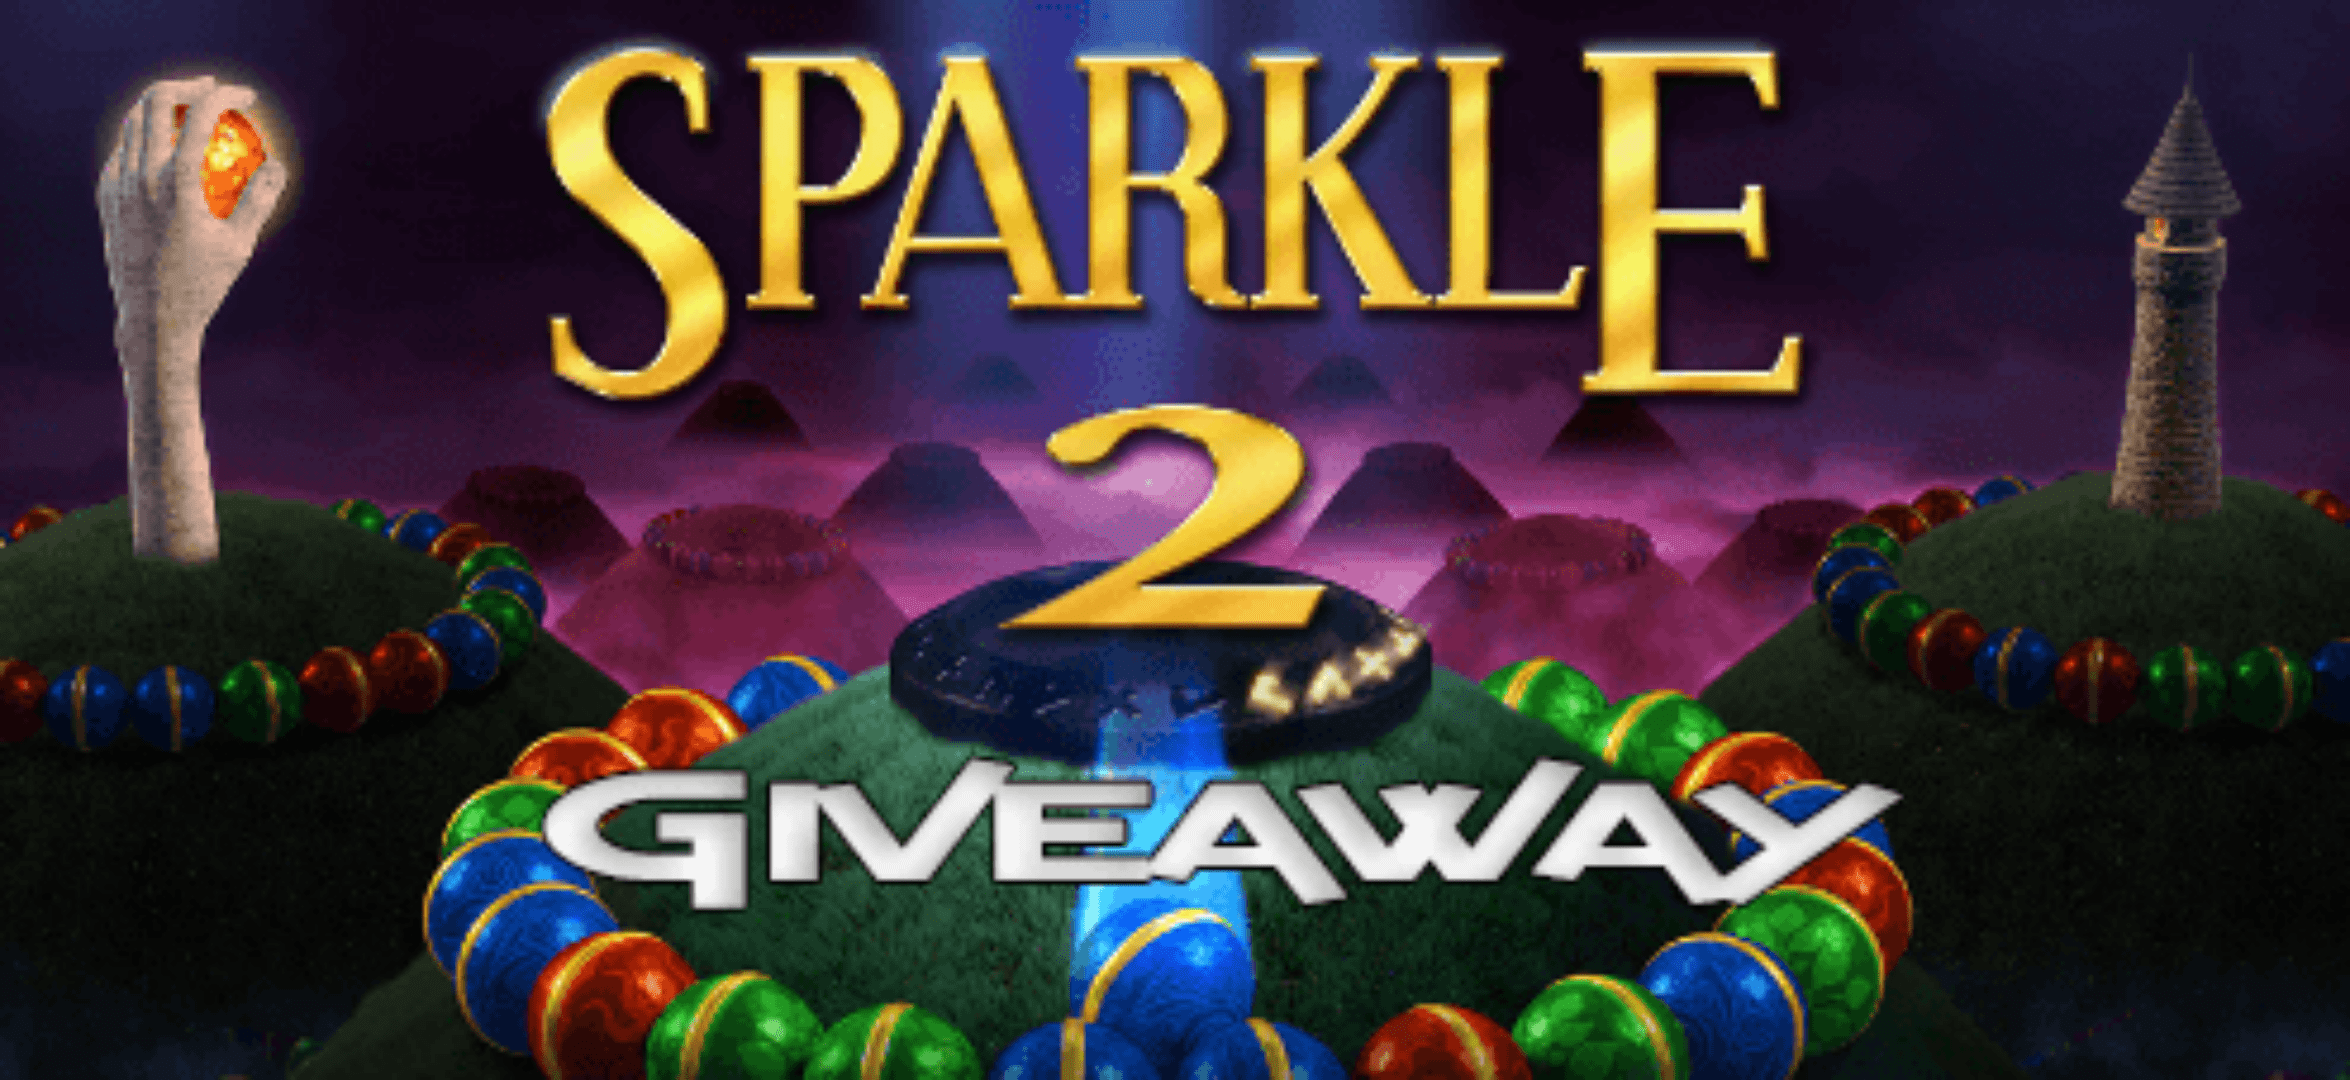 Sparkle 2 Early Access Xbox One Code Giveaway